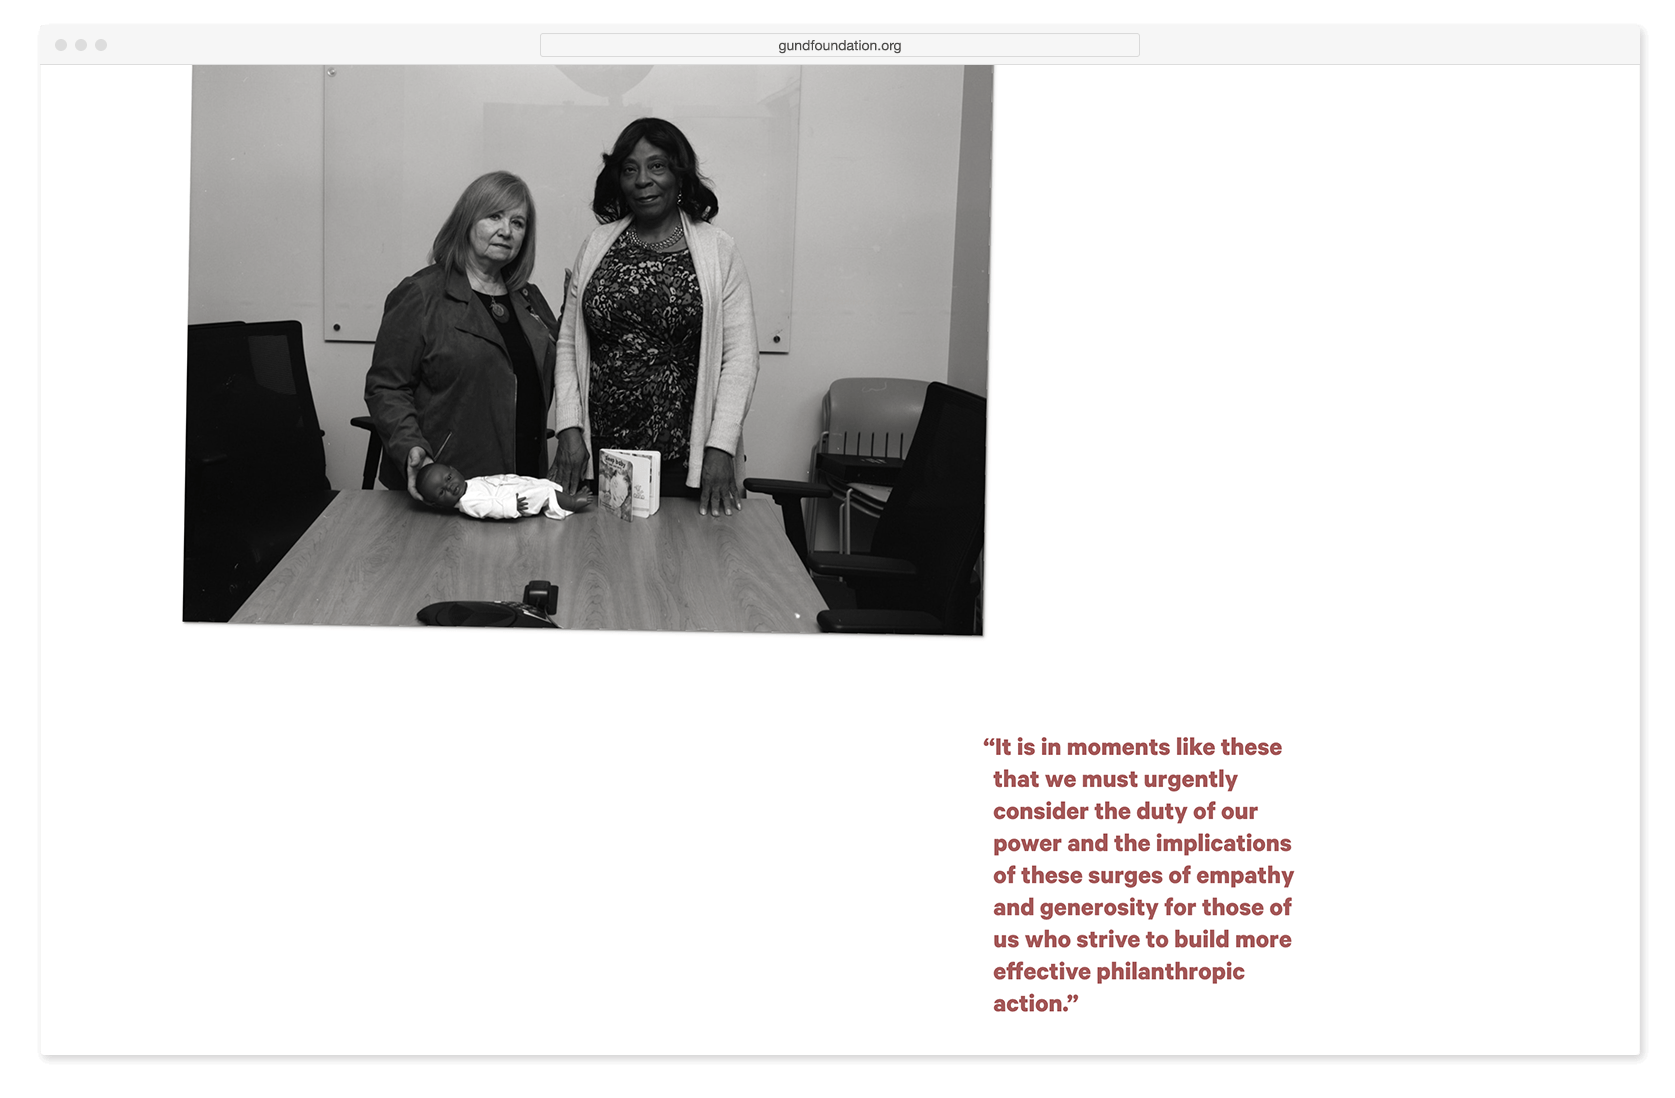 Web browser view of nonprofit web design, featuring photograph of two women and quote from Gund Foundation Board Chair letter